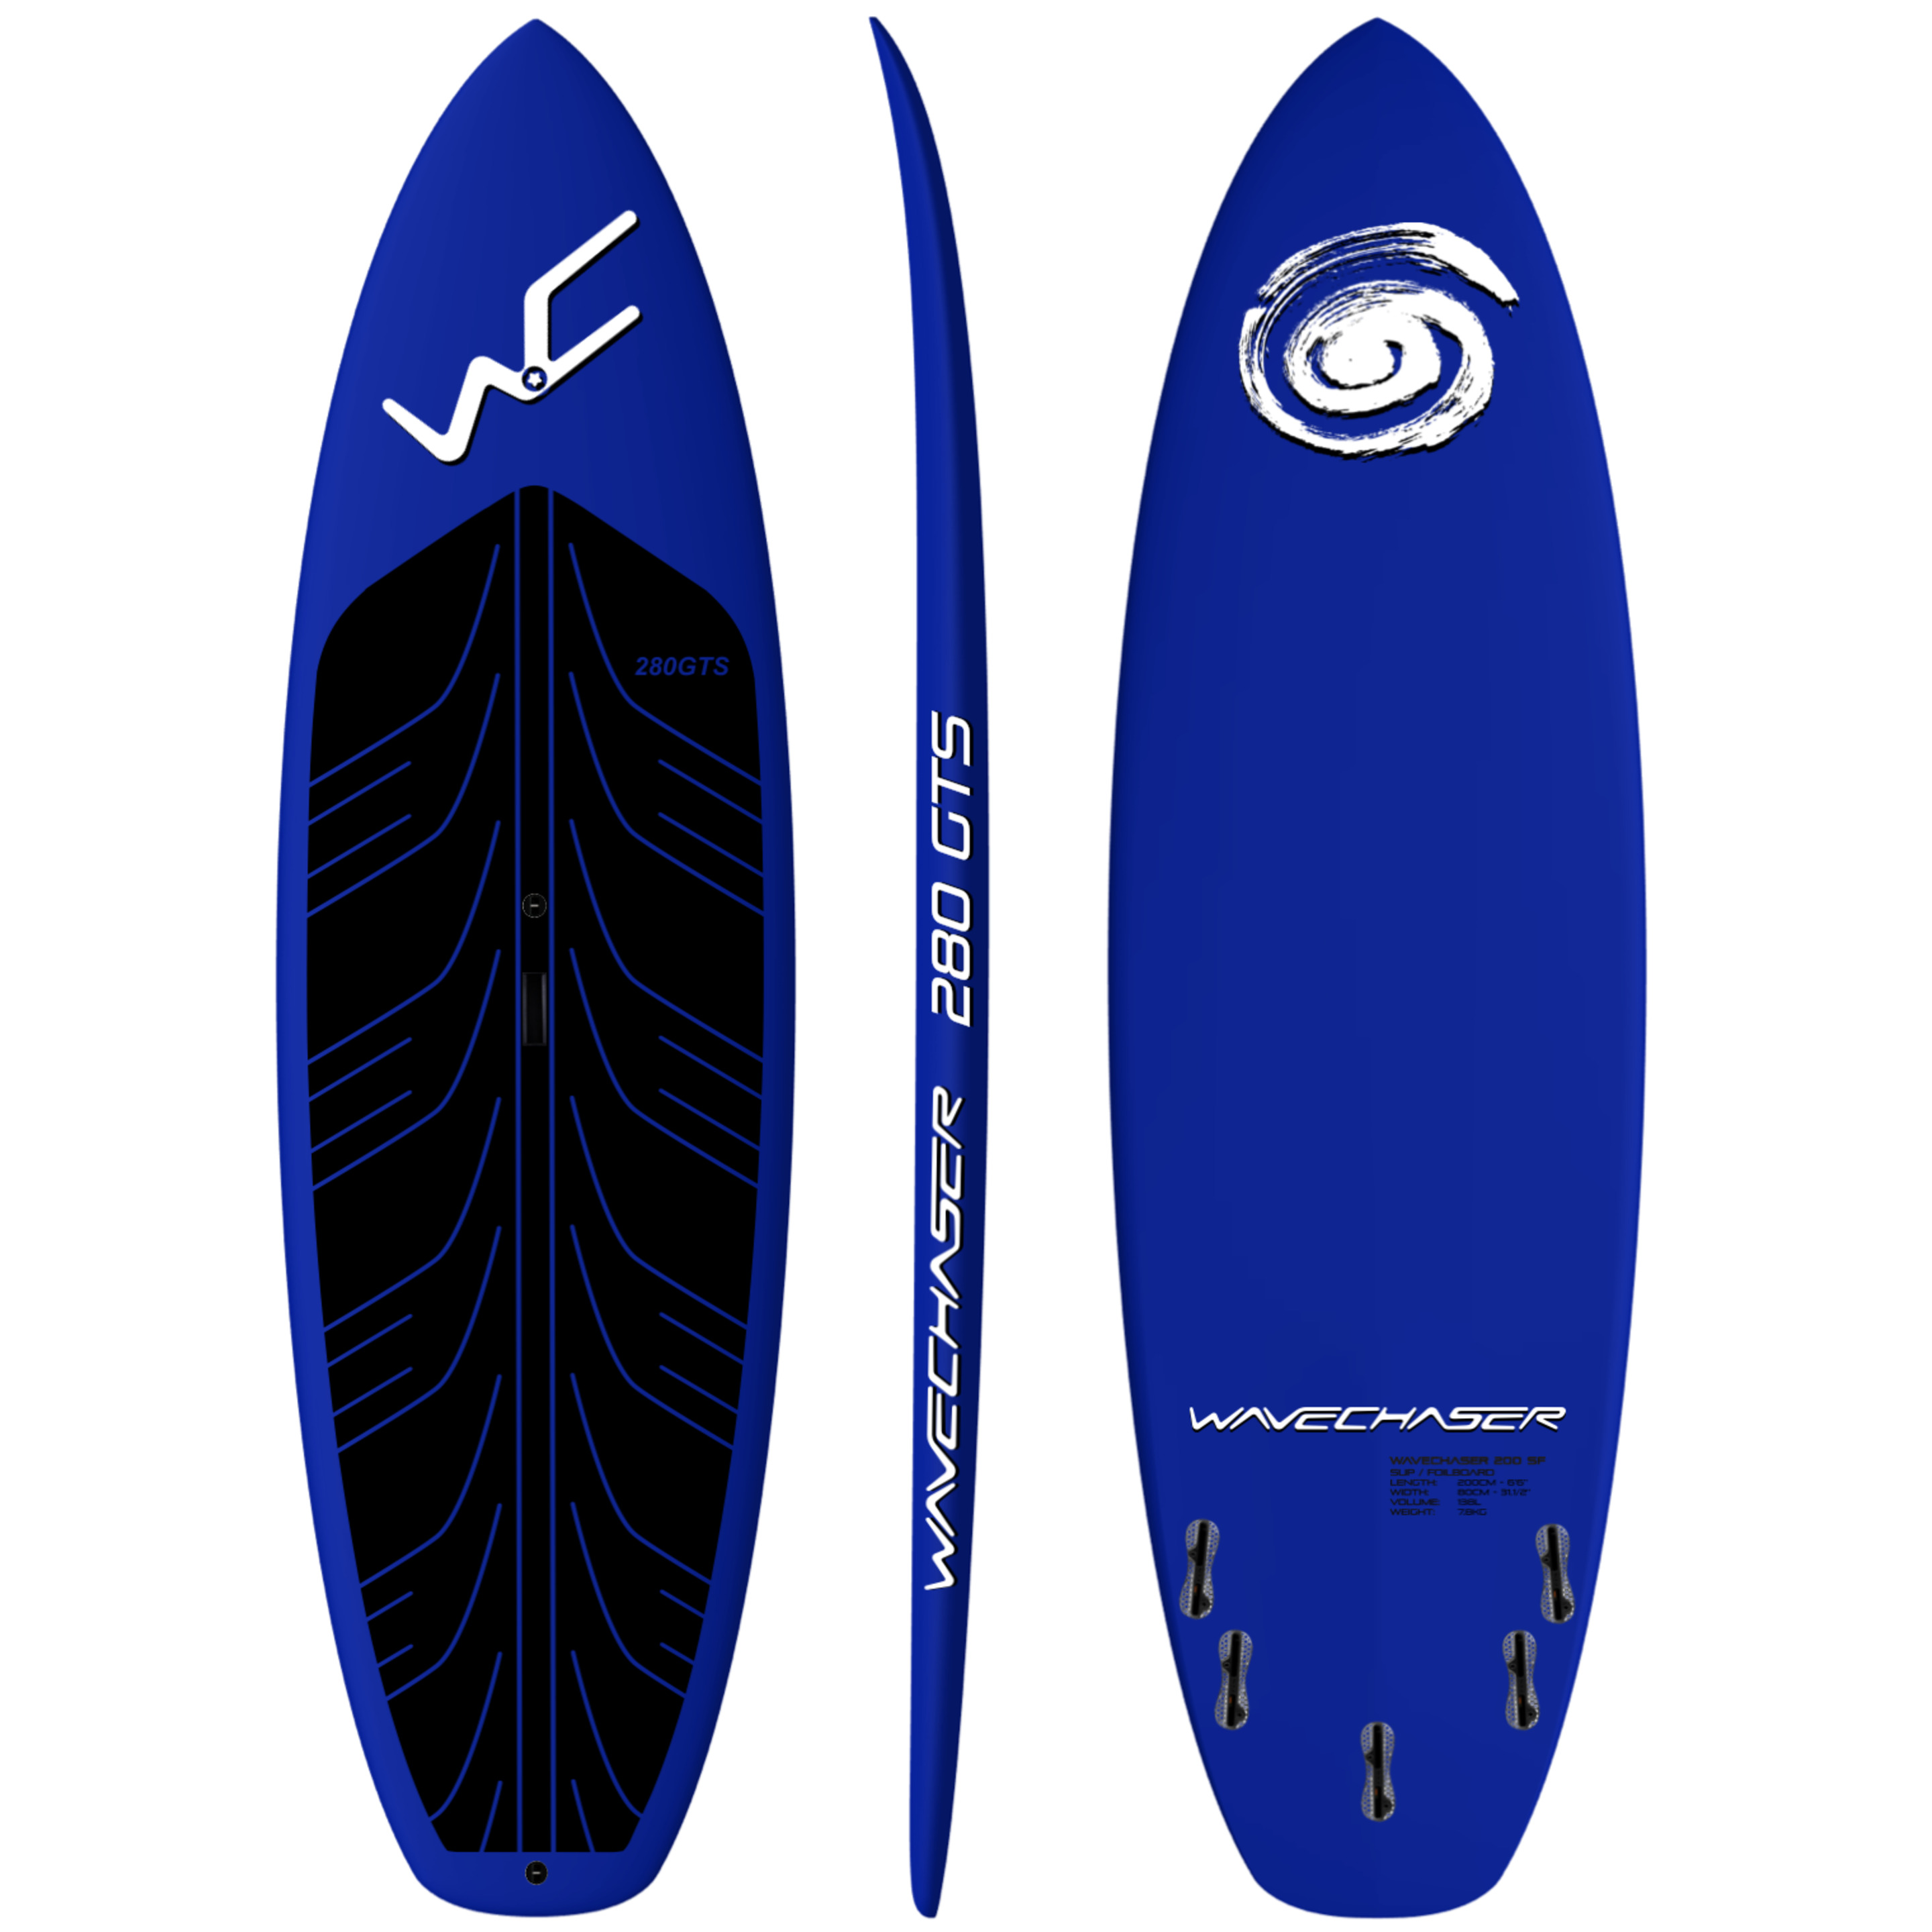 Tabla Sup/ Surf Carbon Wave Chaser 280 Gts